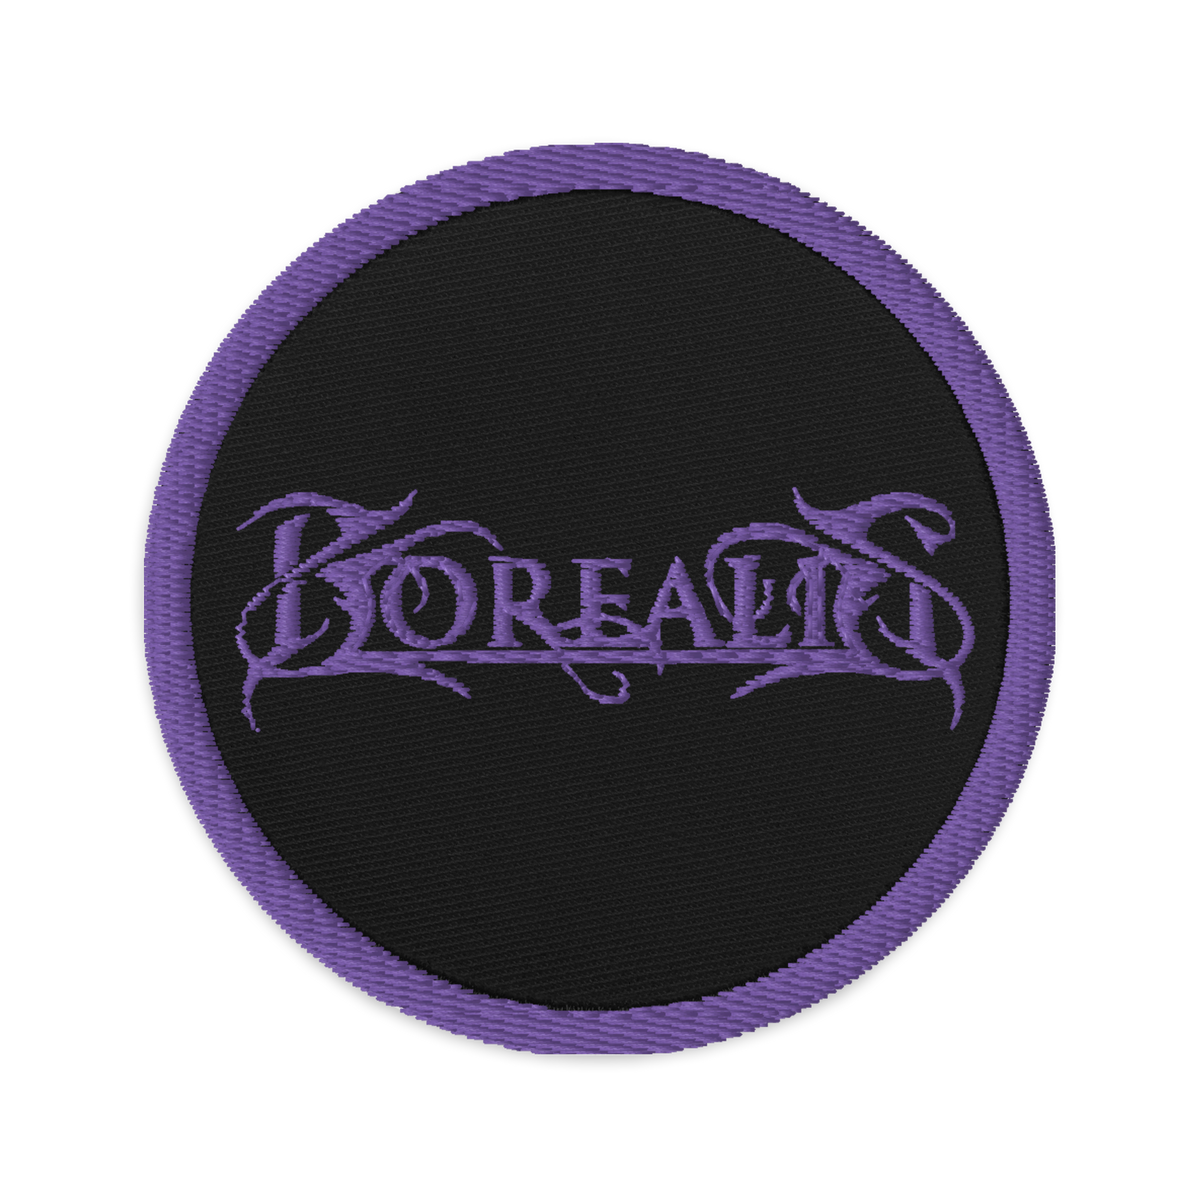 Borealis Embroidered Patch - Purple